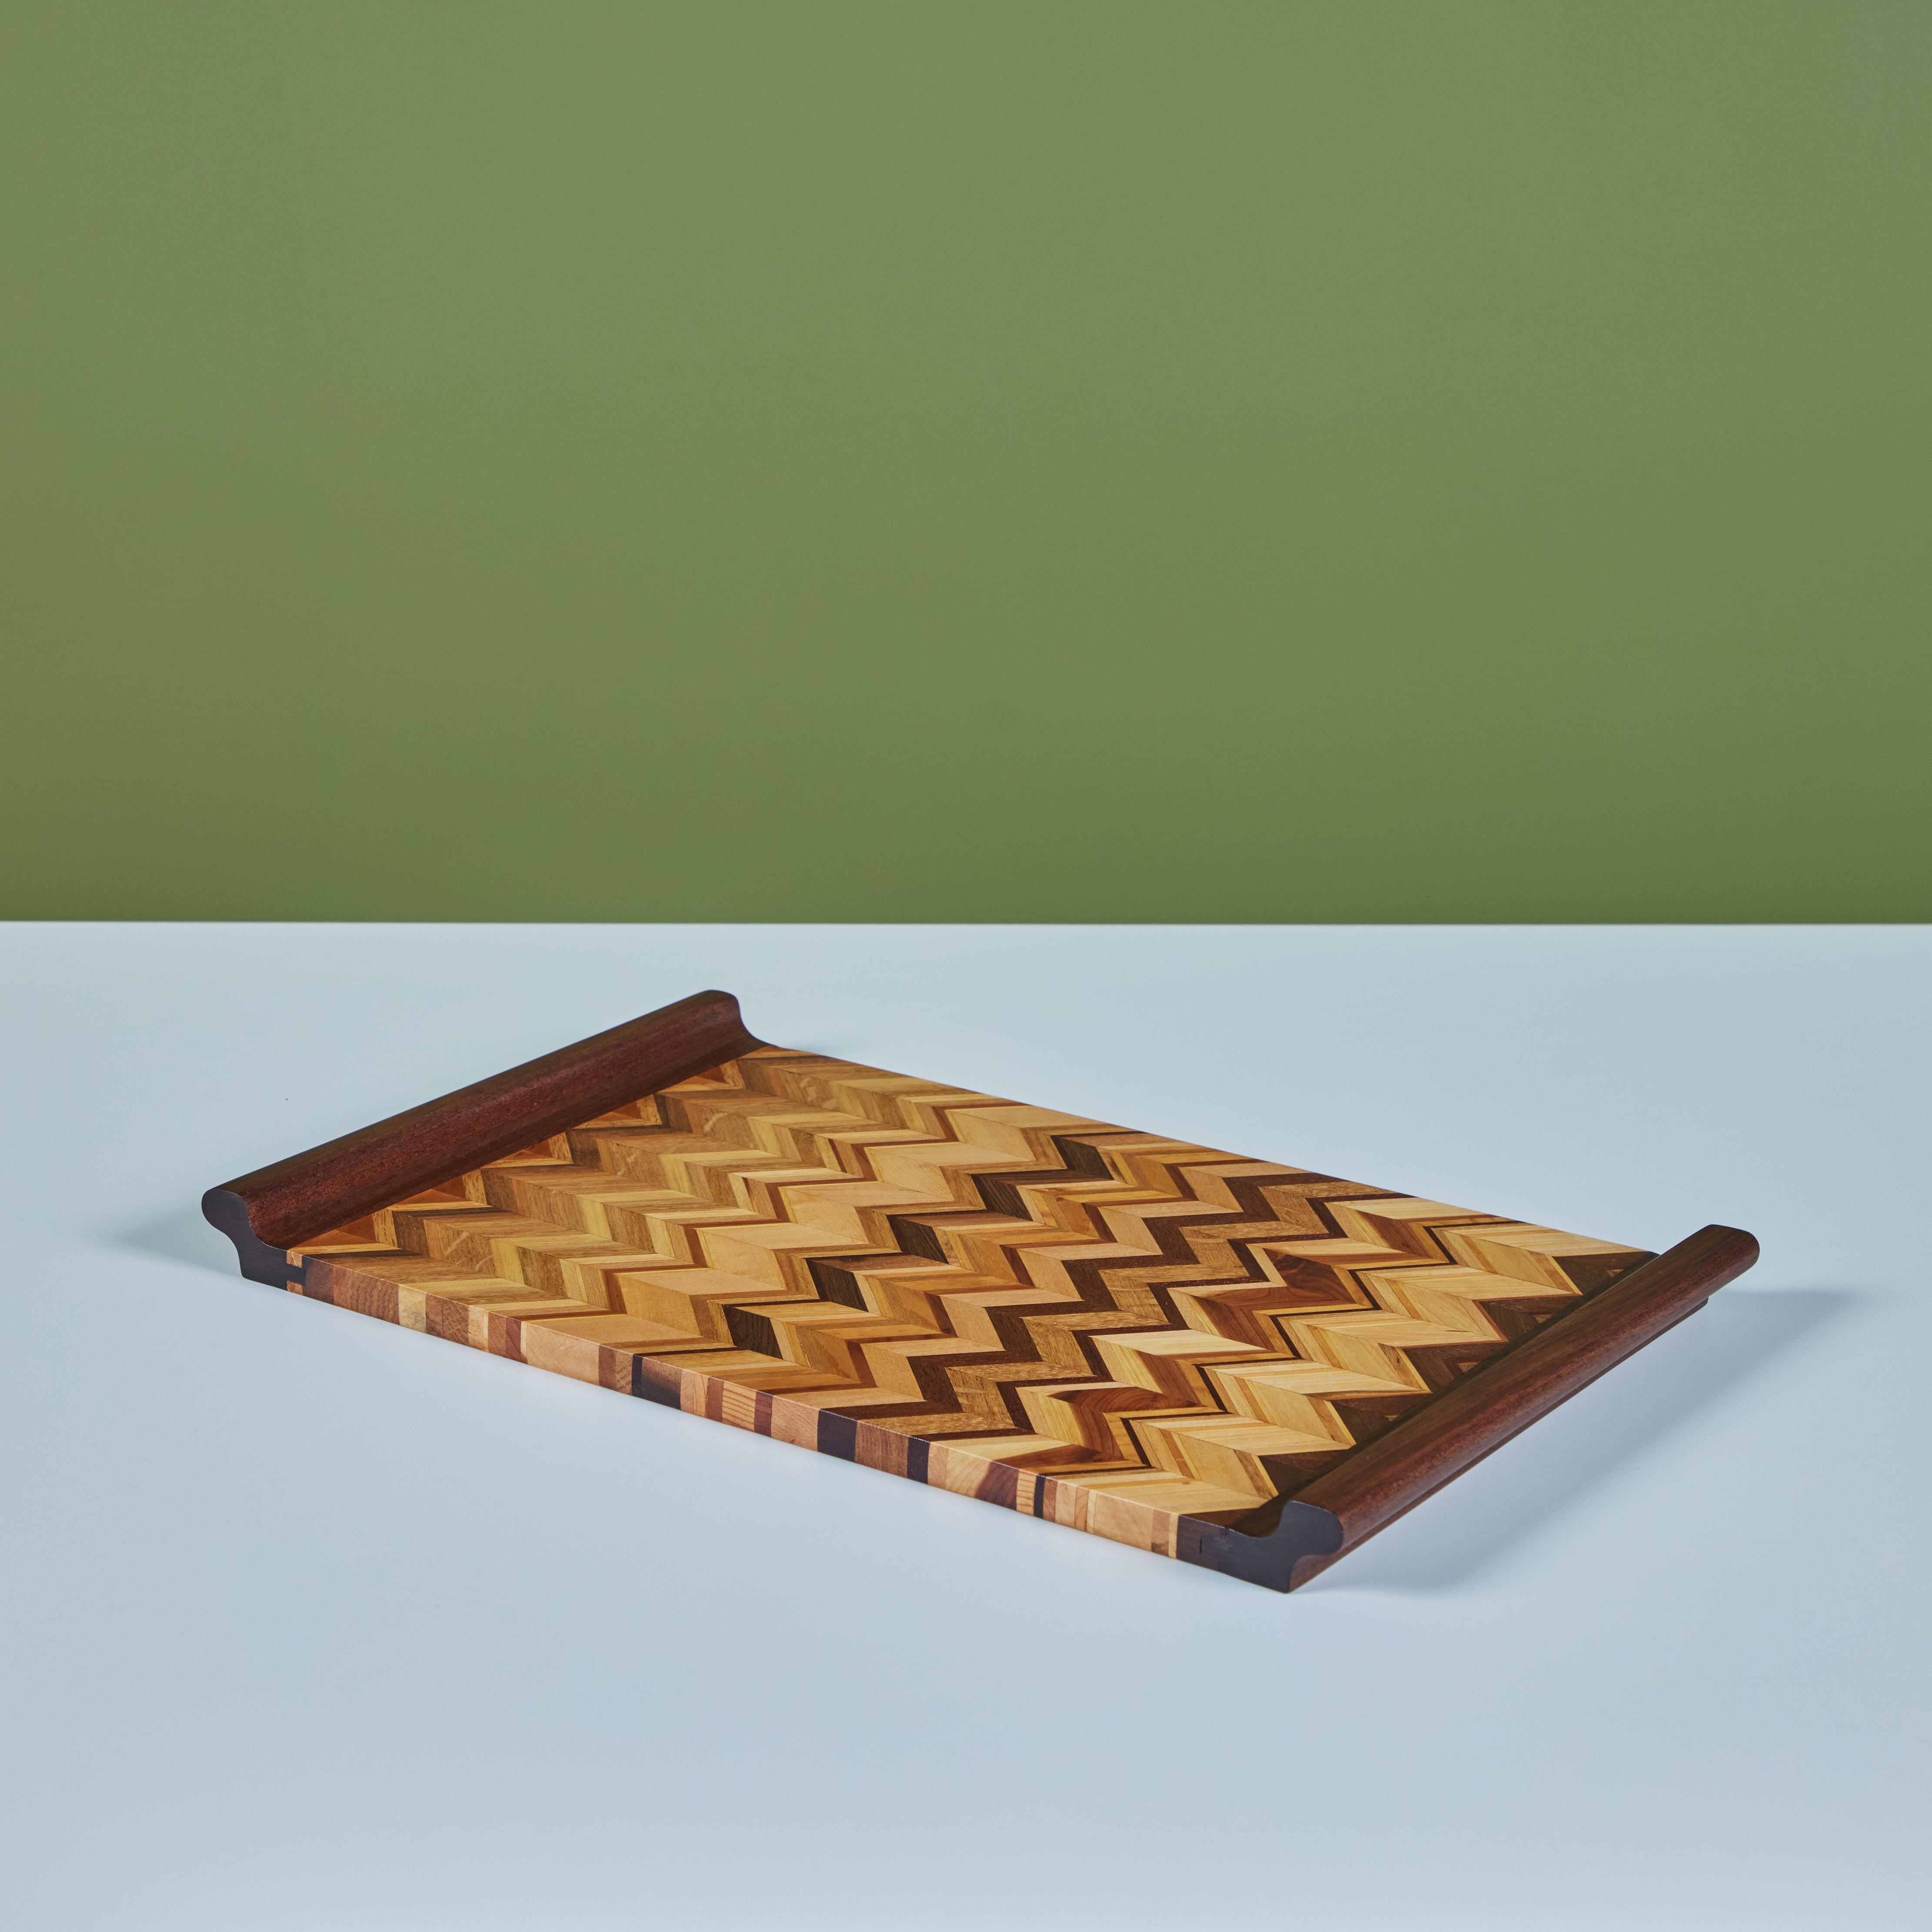 A rosewood serving tray by Don Shoemaker for his company Señal in the 1960s. The surface of the tray has a repeating geometric linear marquetry pattern in a gradient of local Mexican hardwoods. The rectangular tray has two handles and exposed sides